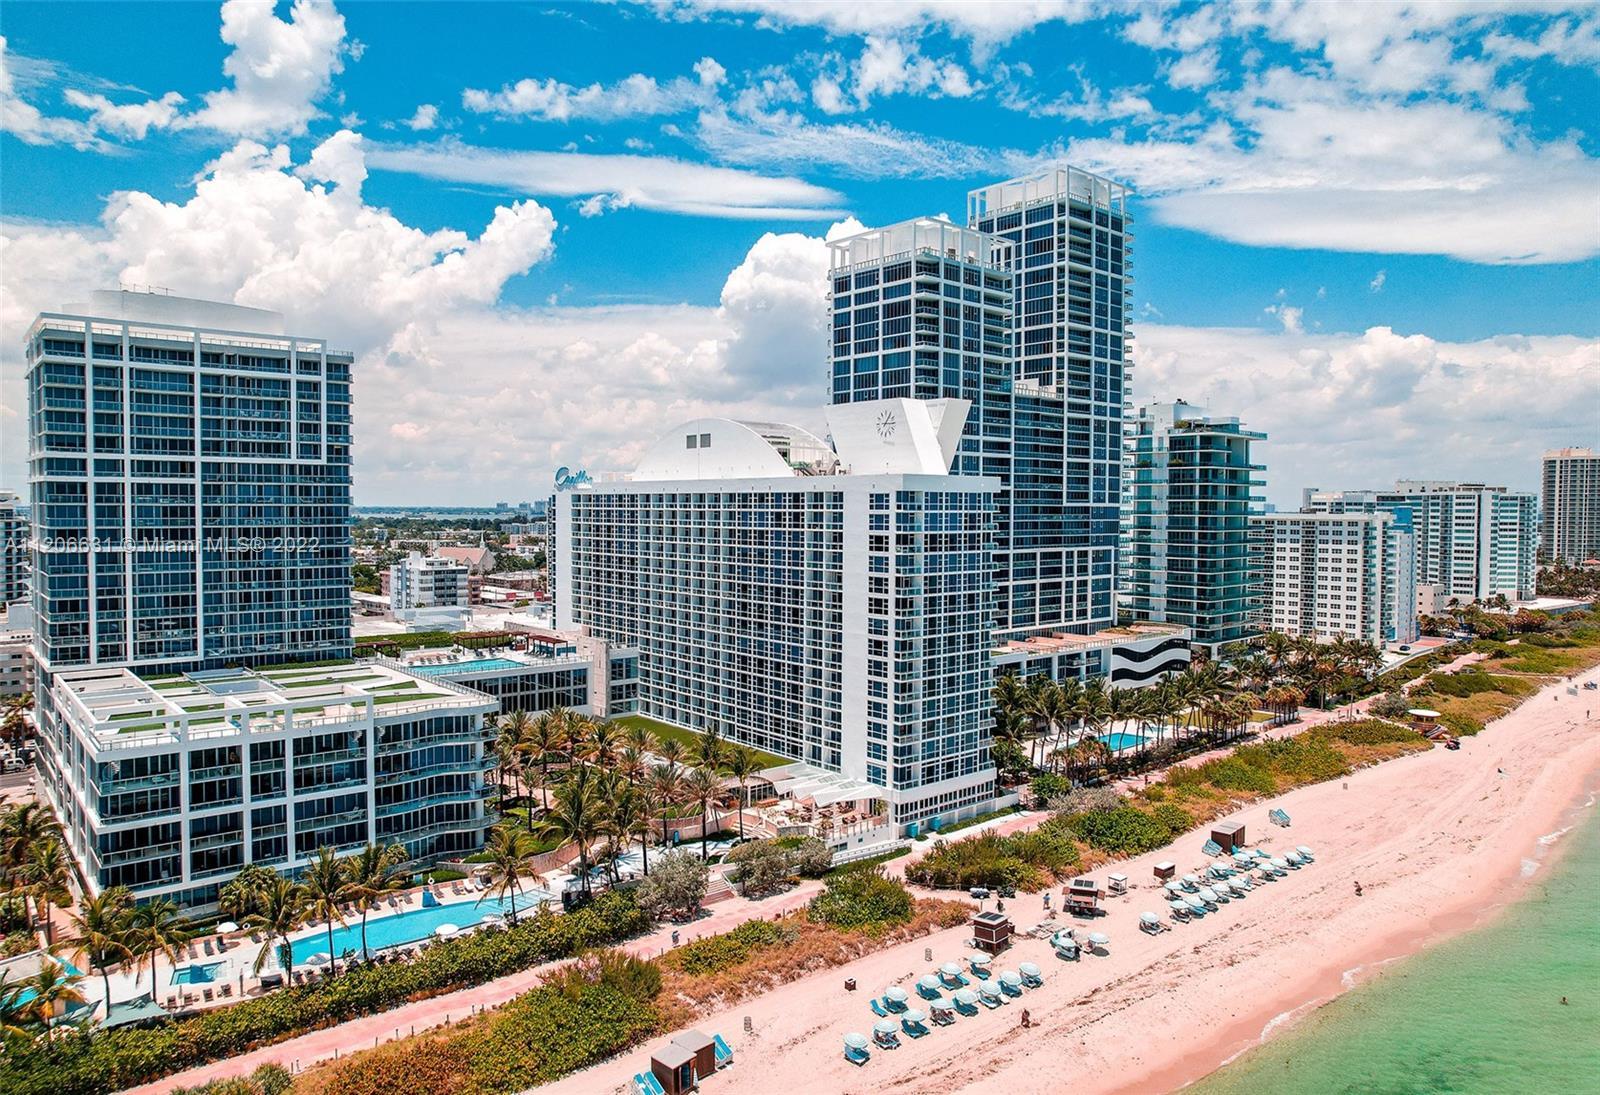 Carillon Hotel & Spa , a premier oceanfront resort. Ocean & Palm Court views from floor-to-ceiling w